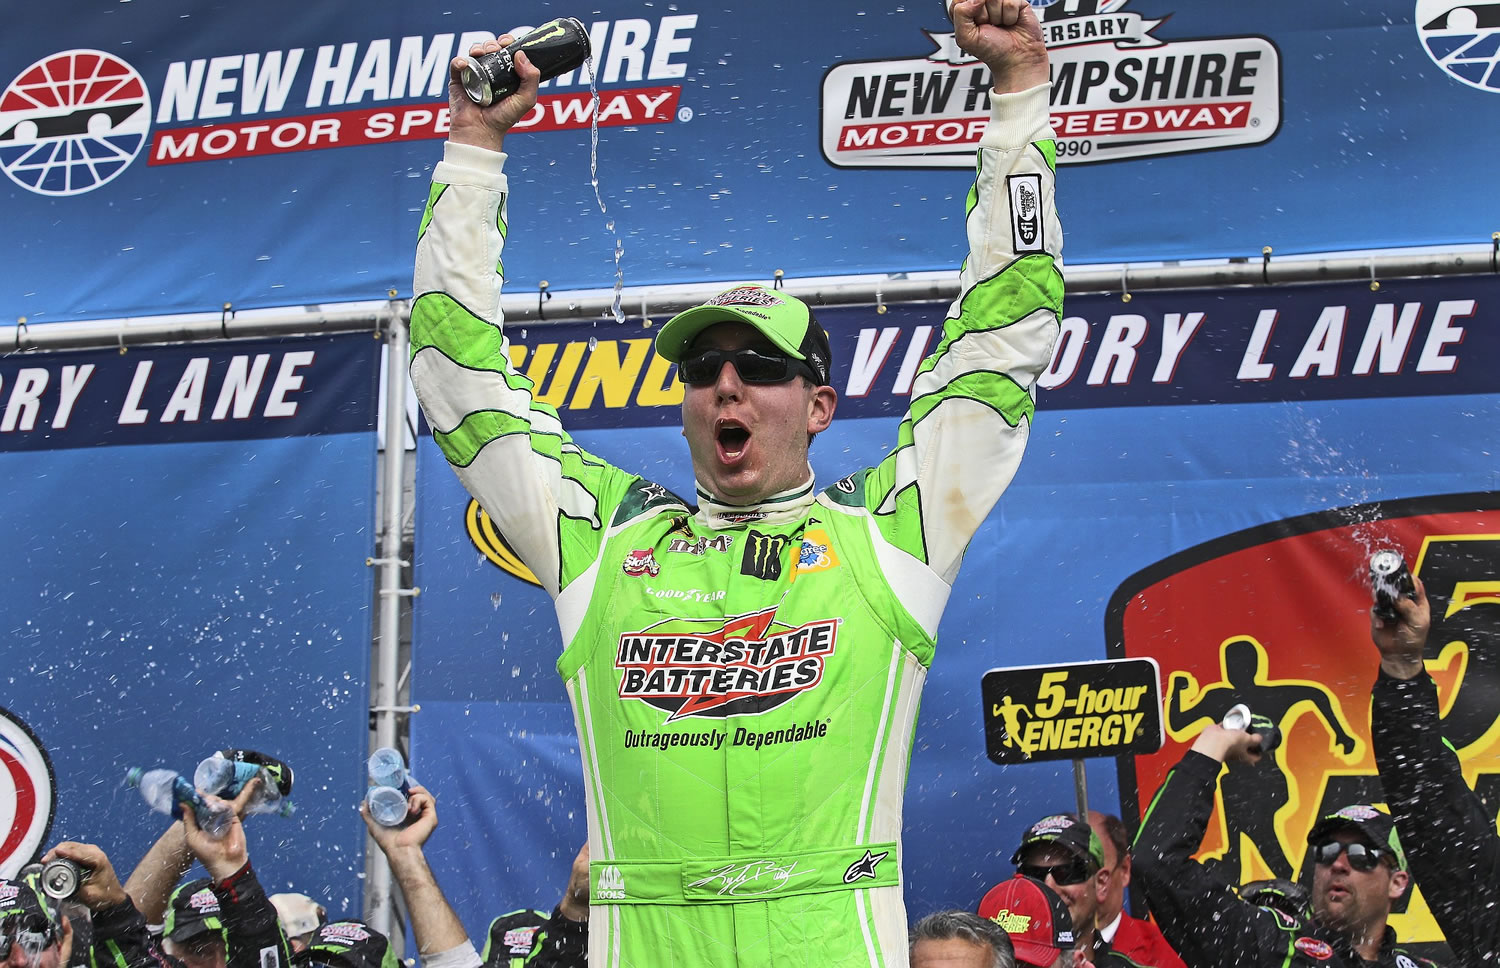 Kyle Busch celebrates in Victory Lane after winning the NASCAR Sprint Cup series auto race at New Hampshire Motor Speedway in Loudon, N.H., on Sunday, July 19, 2015.